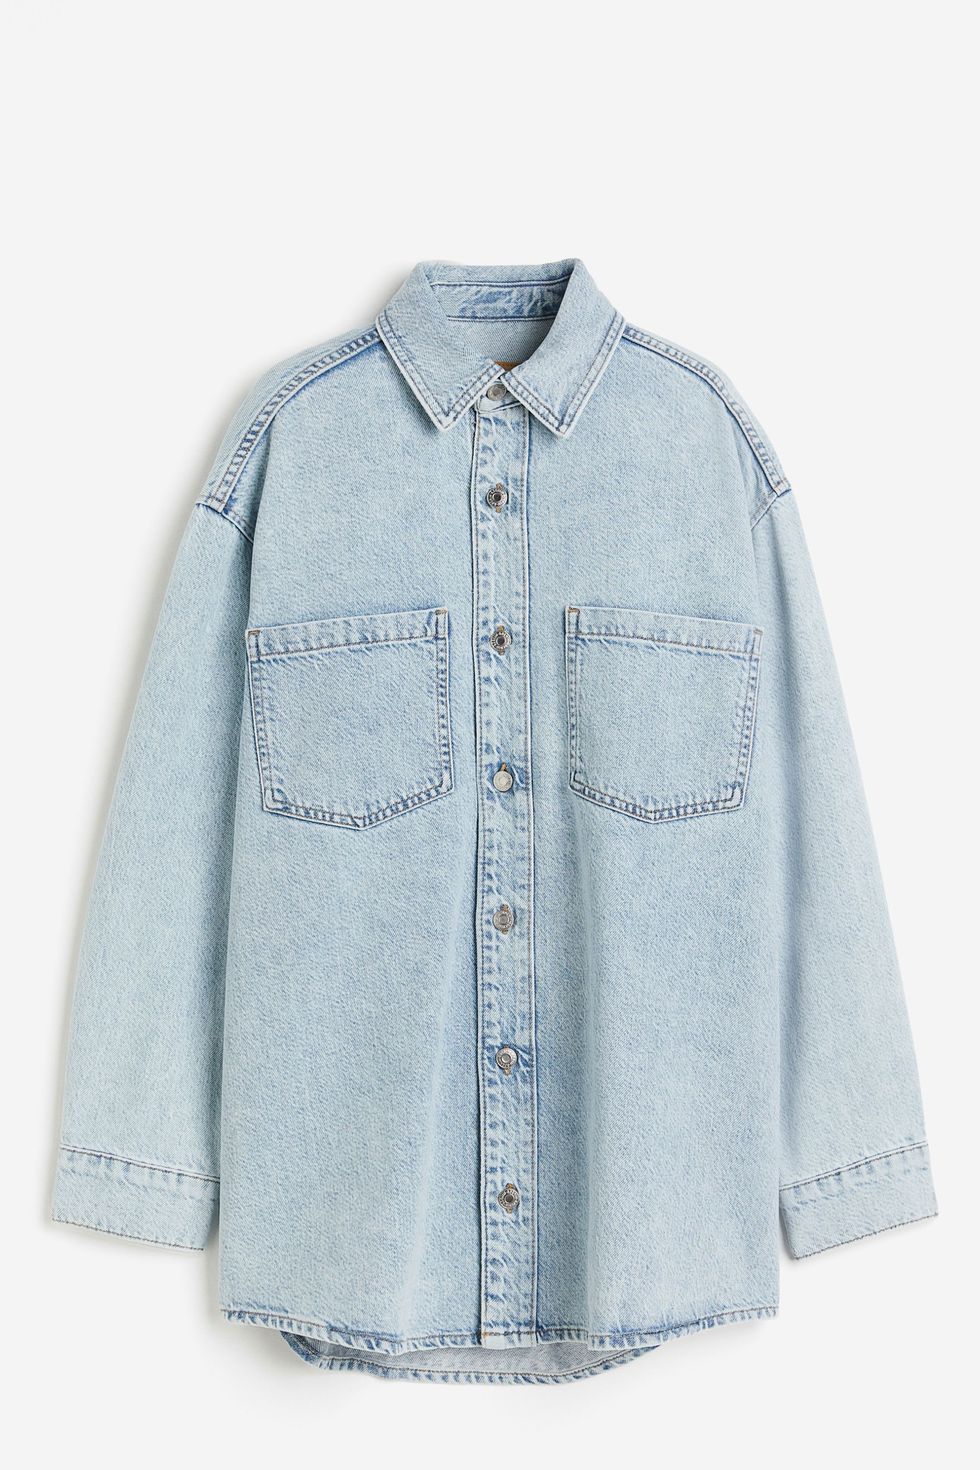 H&M clothing: The best new H&M clothing to buy now